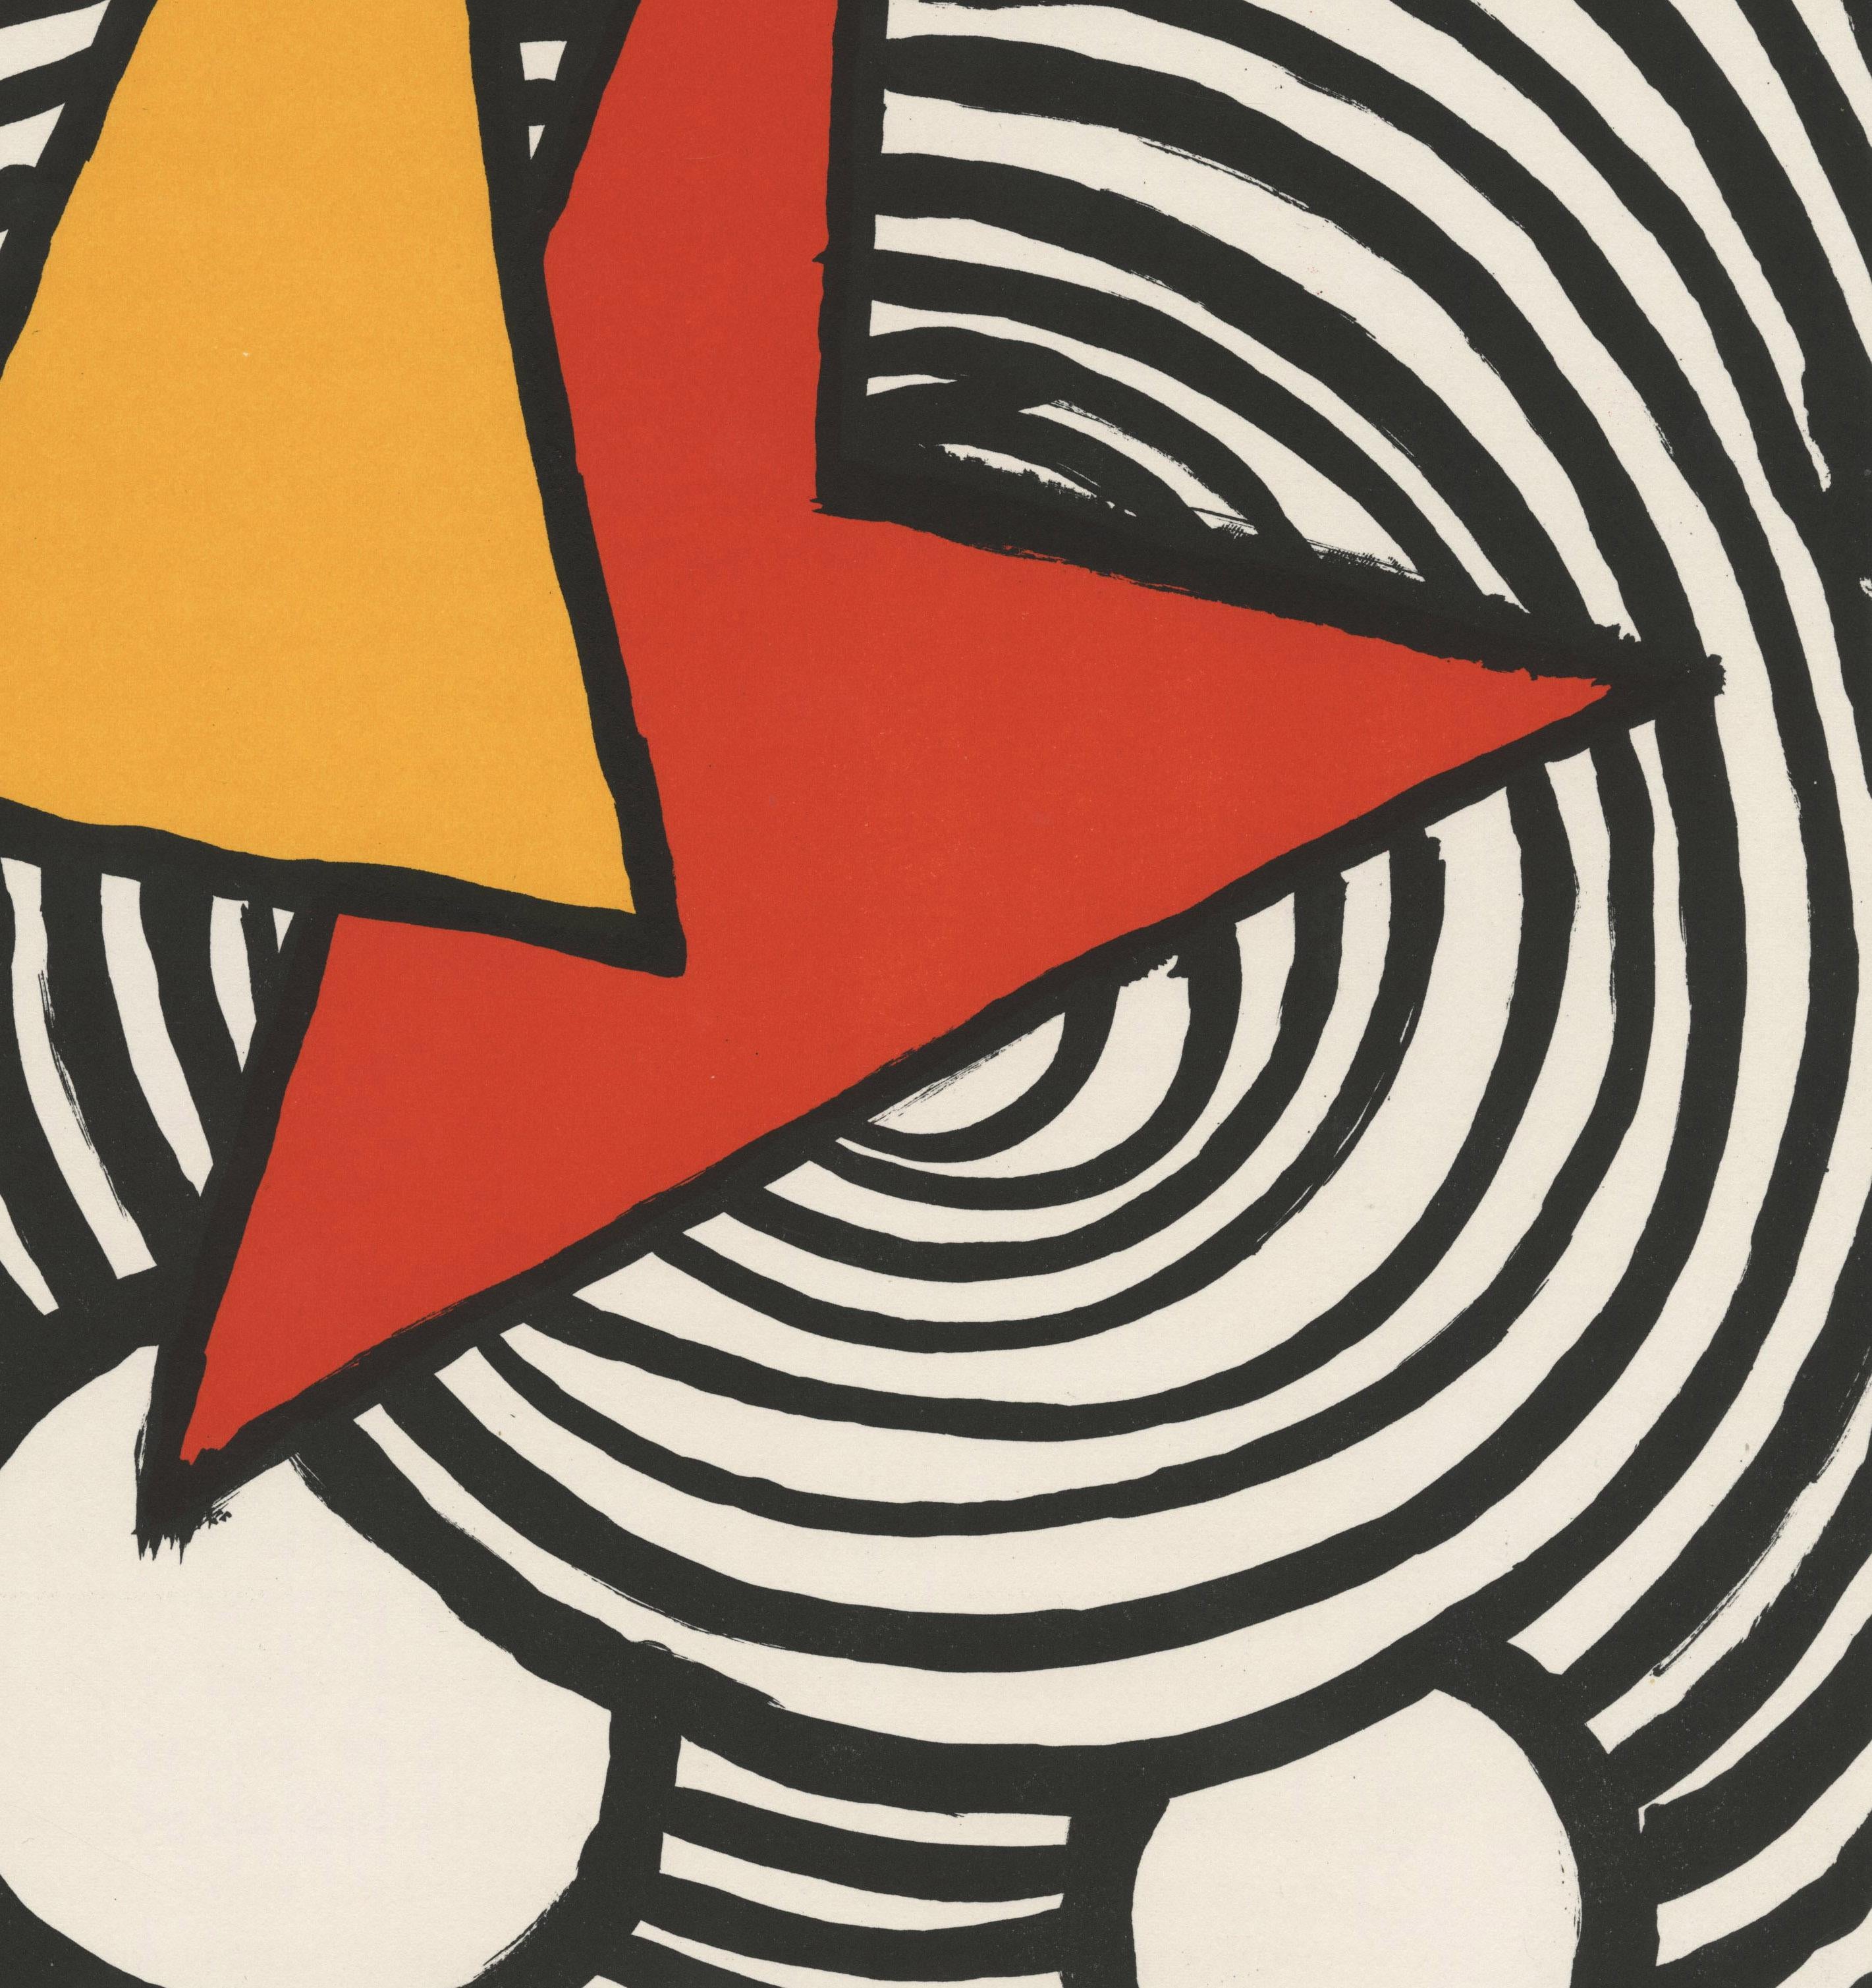 Derriere Le Miroir-Page 9 - Black Abstract Print by Alexander Calder